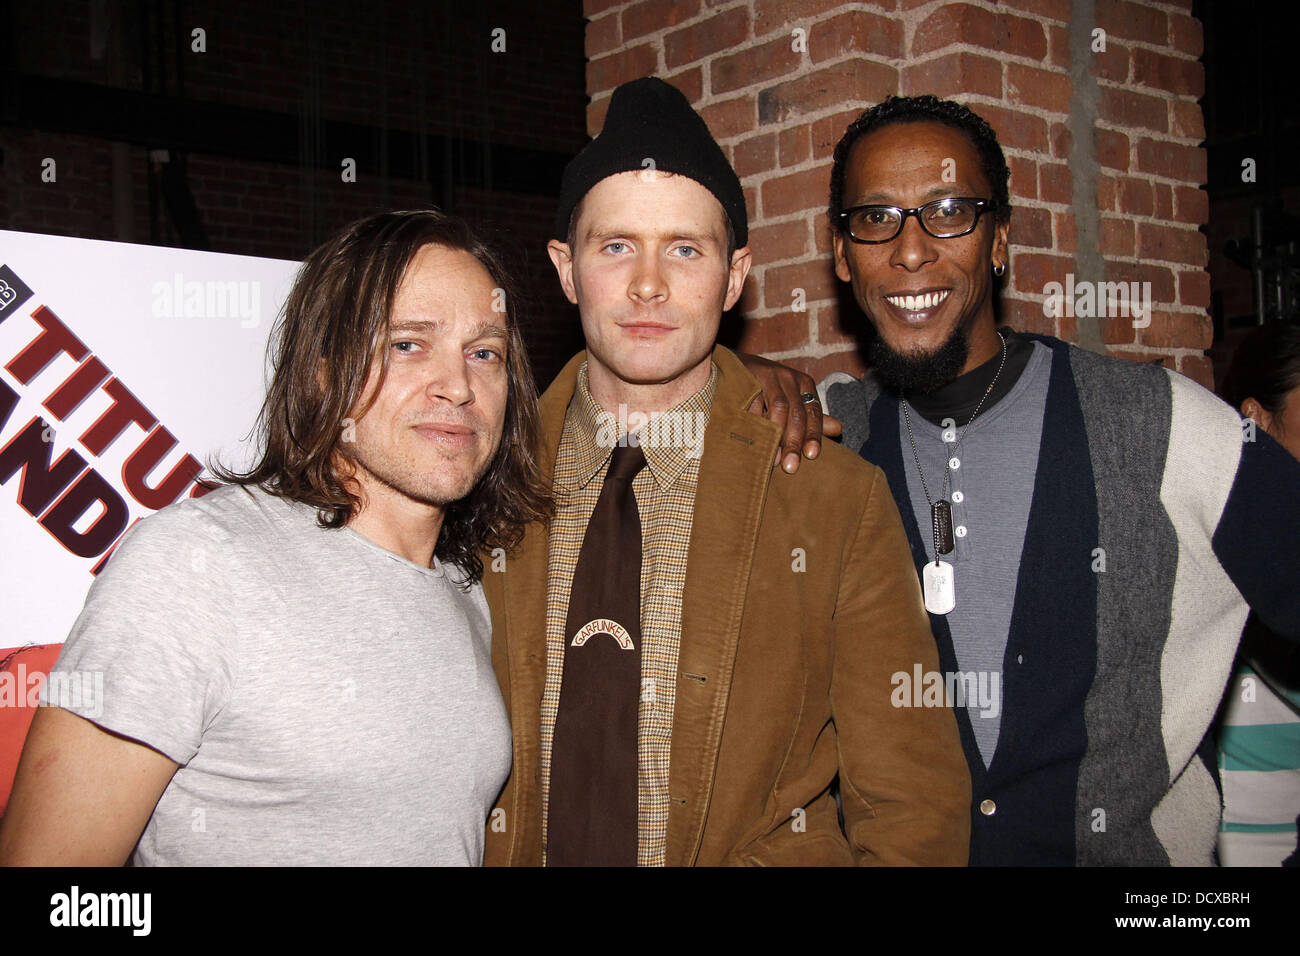 Rob Campbell, Patrick Carroll und Ron Kephas Jones Opening Night after-Party für "Titus Andronicus" an der öffentlichen Theater New York City, USA - 13.12.11 Stockfoto